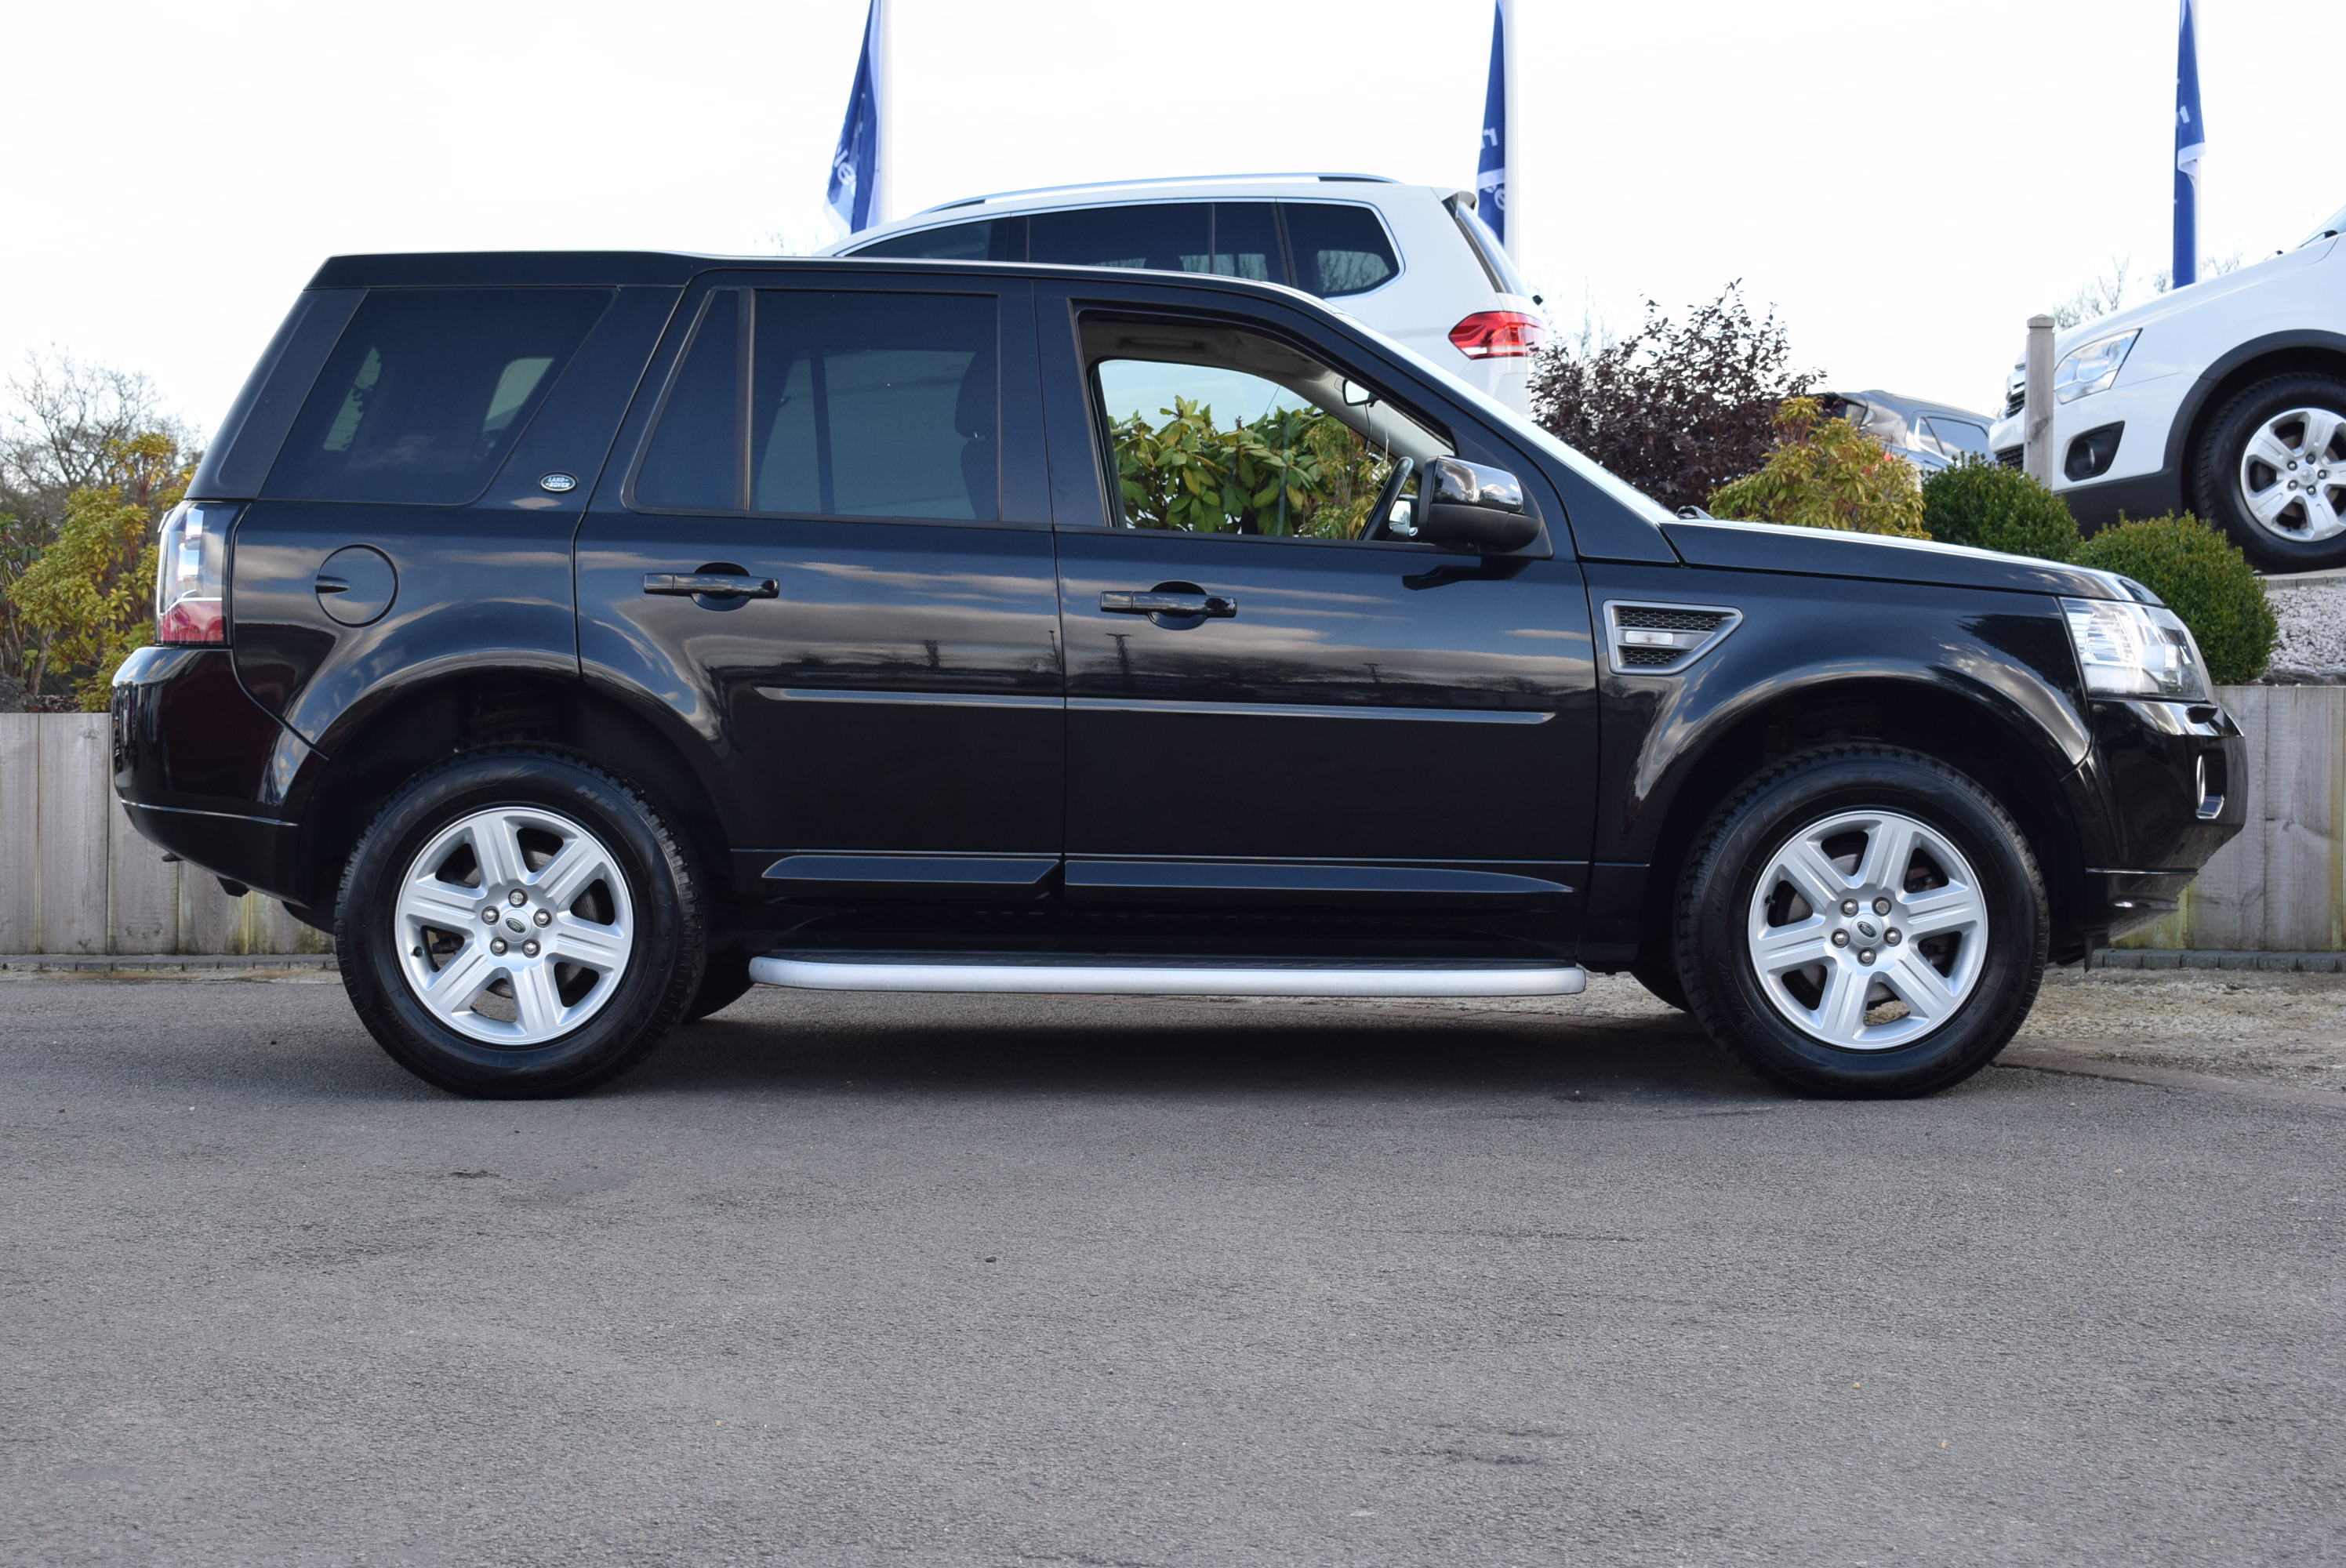 LAND ROVER FREELANDER 2.2 SD4 GS 5dr Auto For Sale